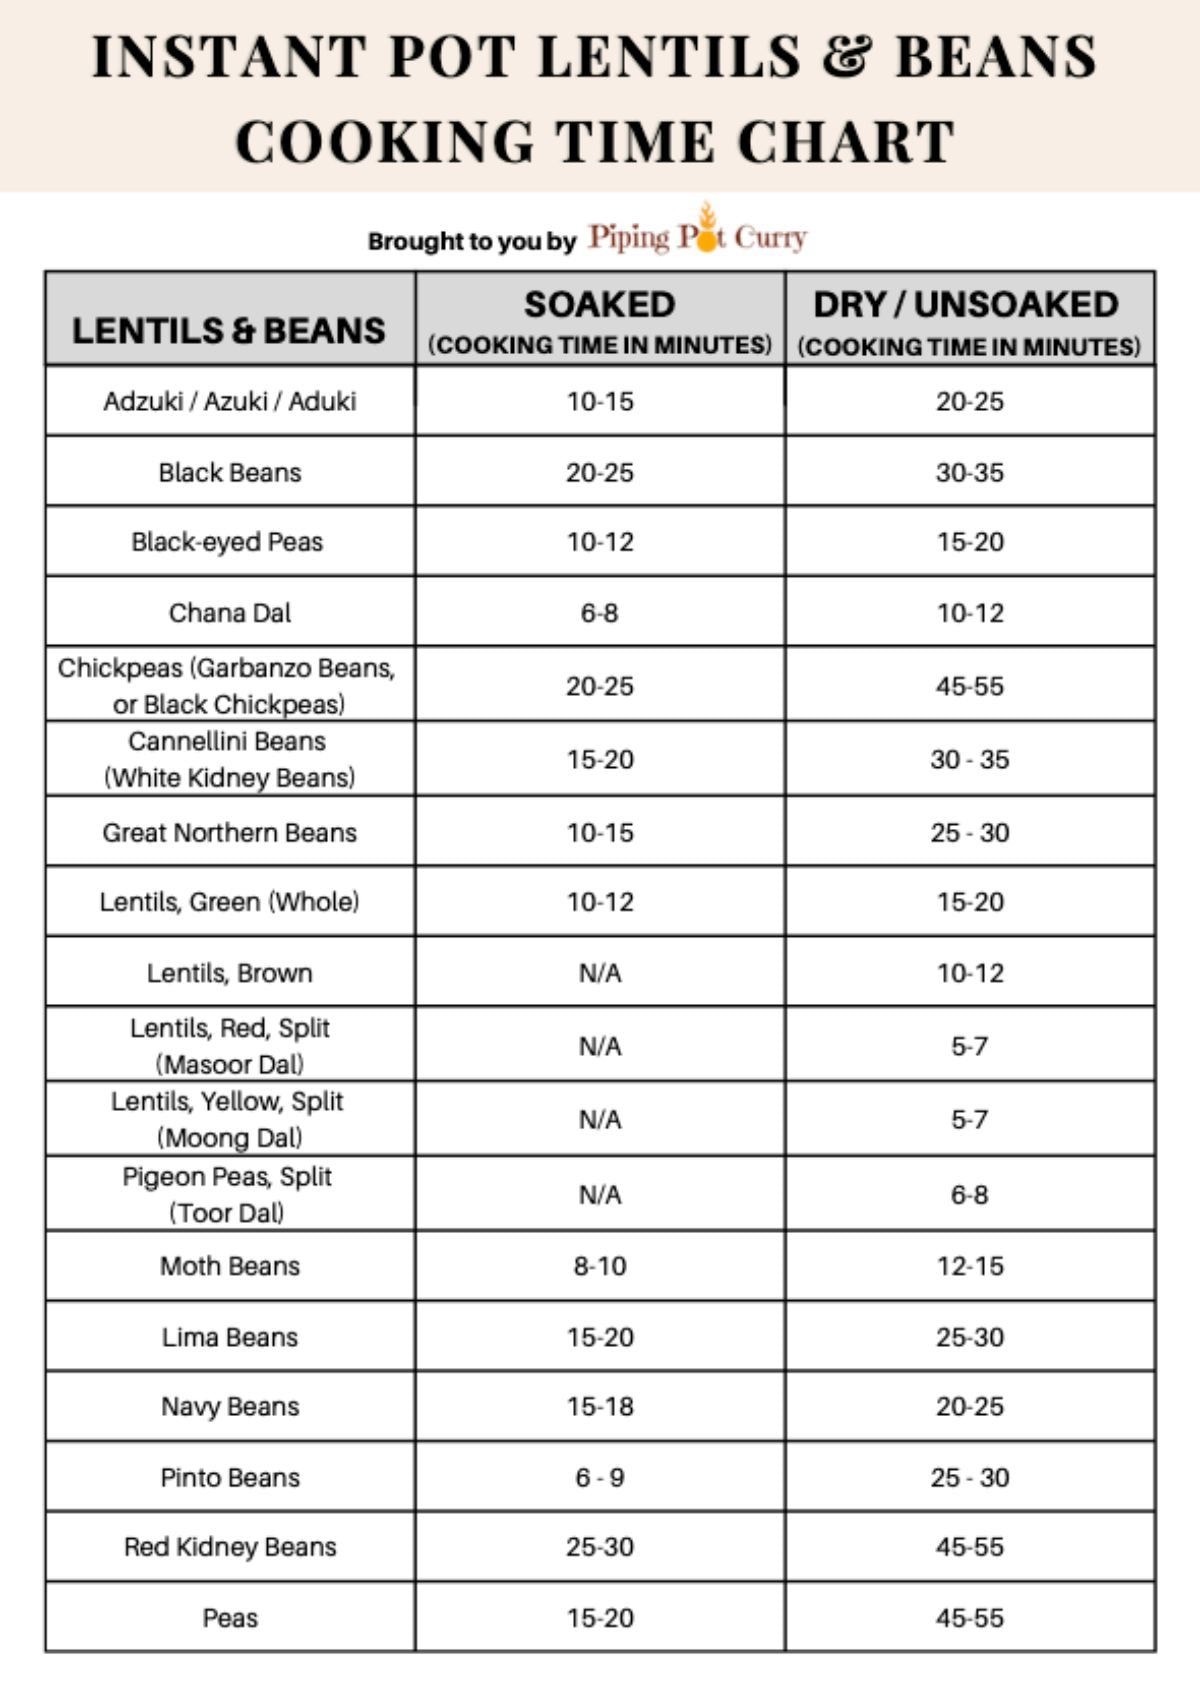 IP lentils & beans cooking time chart